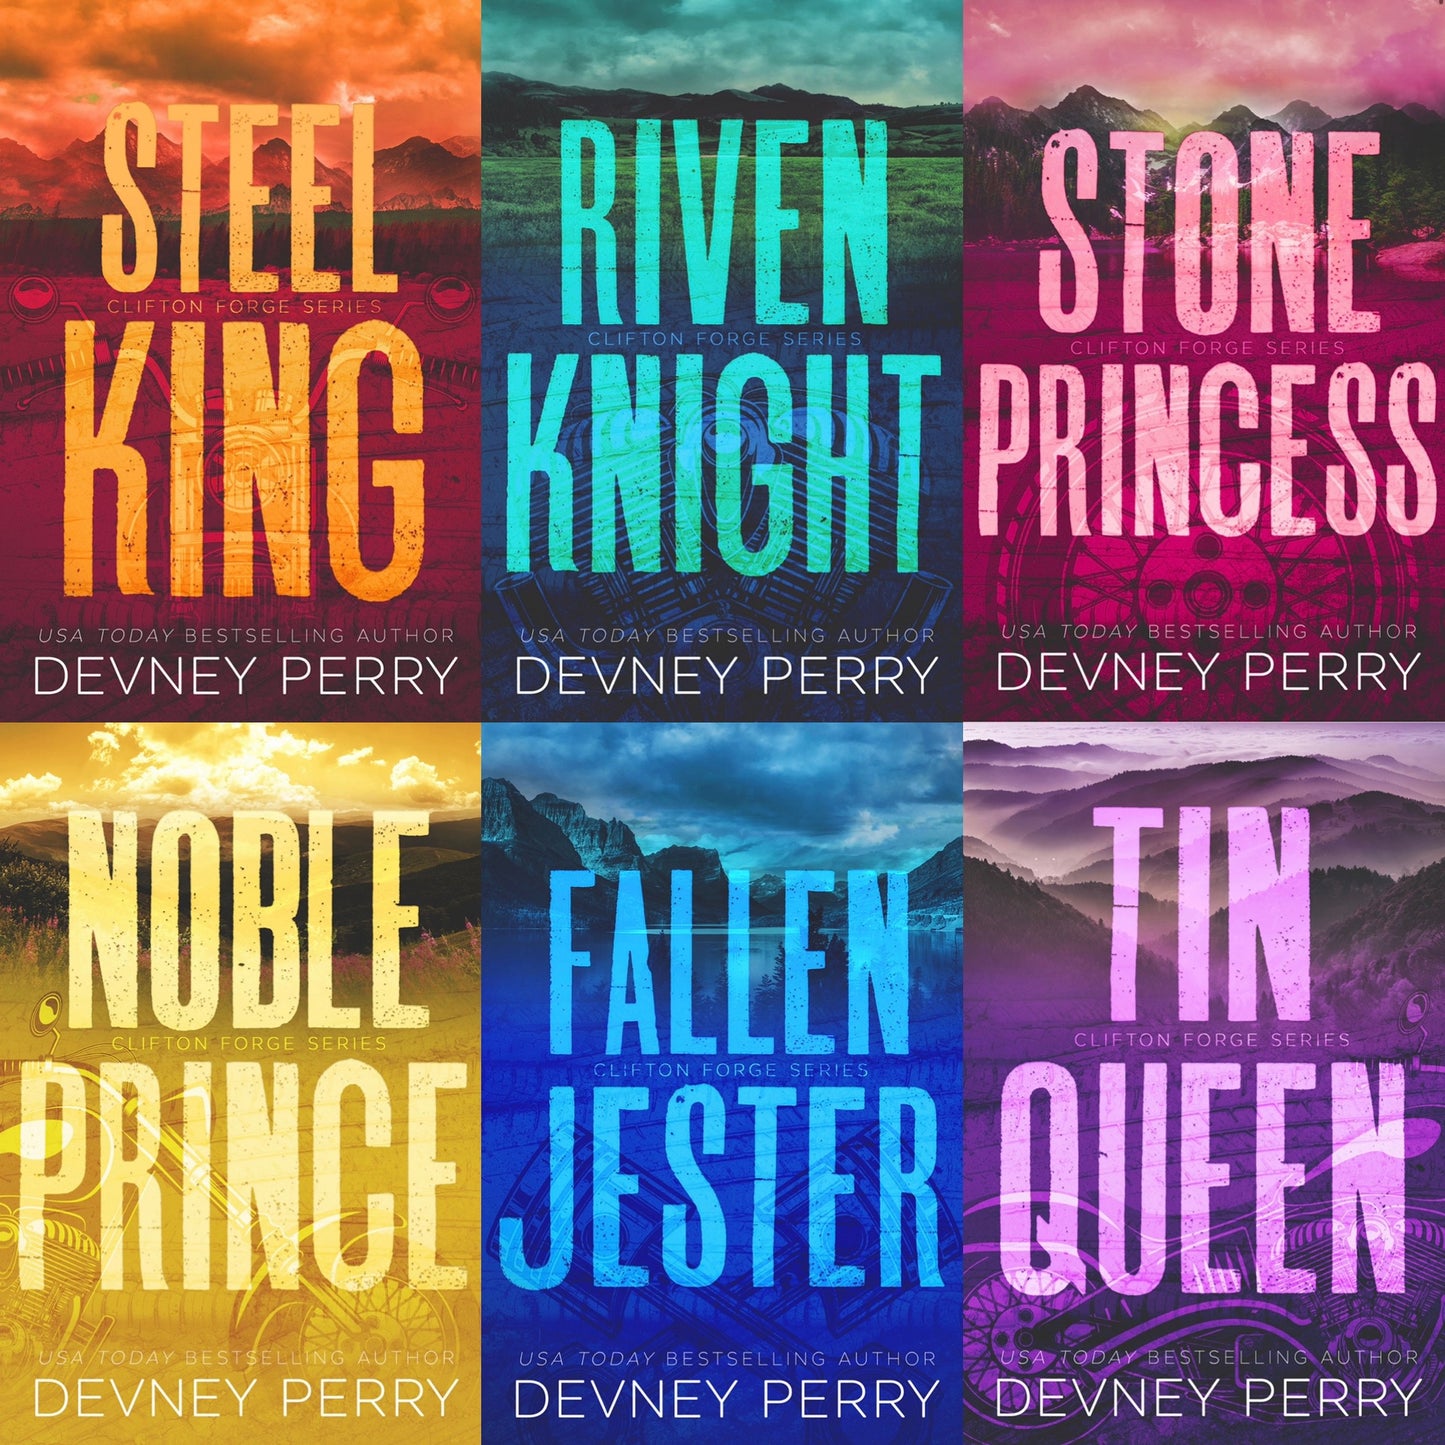 Clifton Forge series by Devney Perry